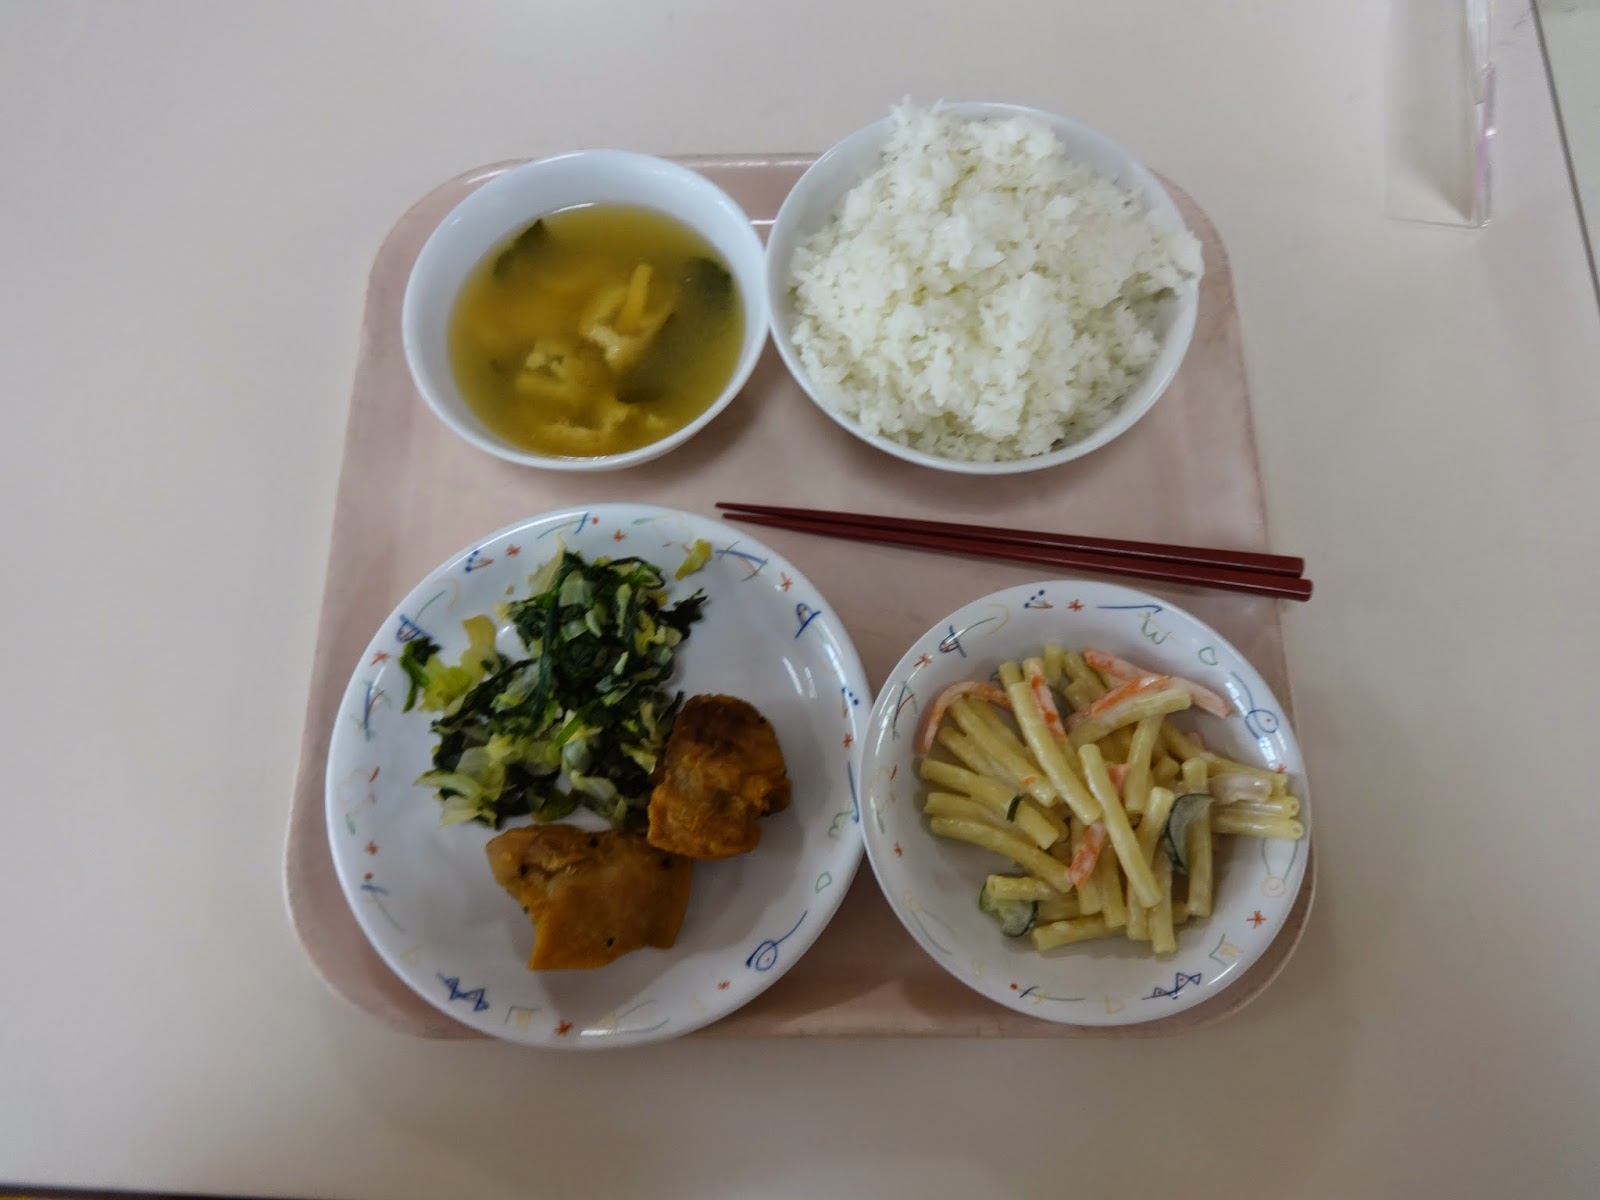 Glimpses of Japan: More Japanese School Lunches